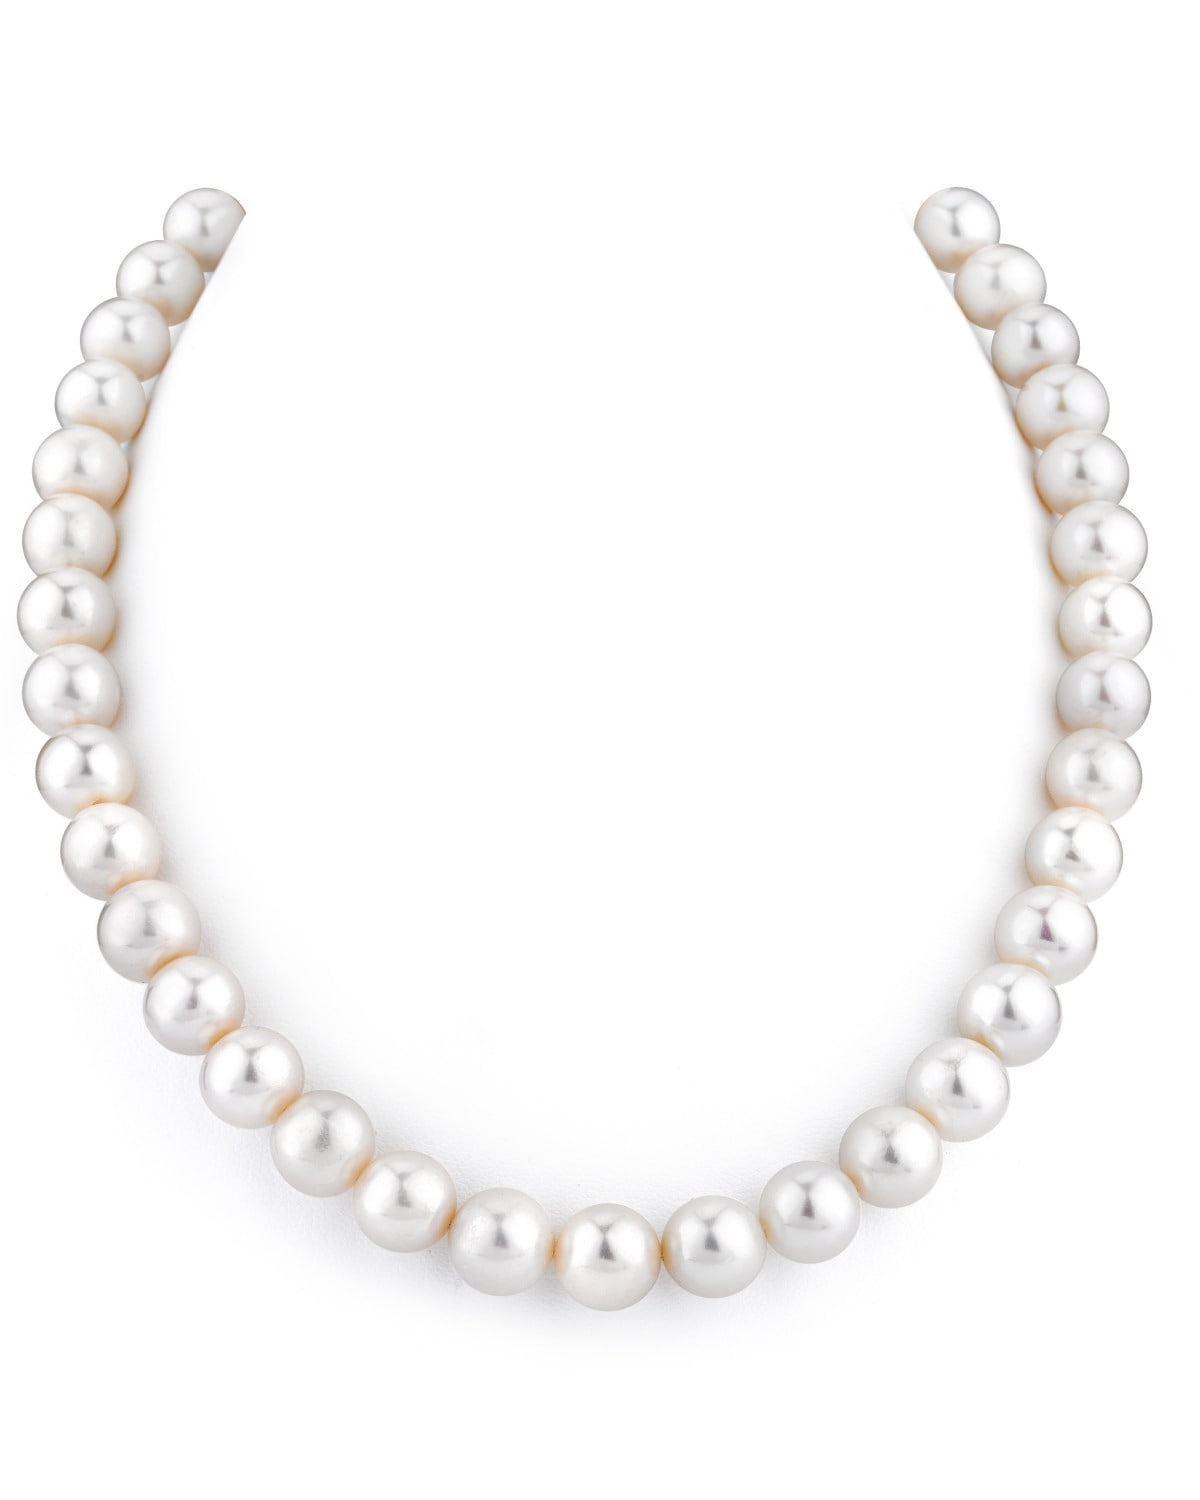 GENUINE WHITE AKOYA PEARL NECKLACE 14K GOLD NEW 10-11MM AAA+